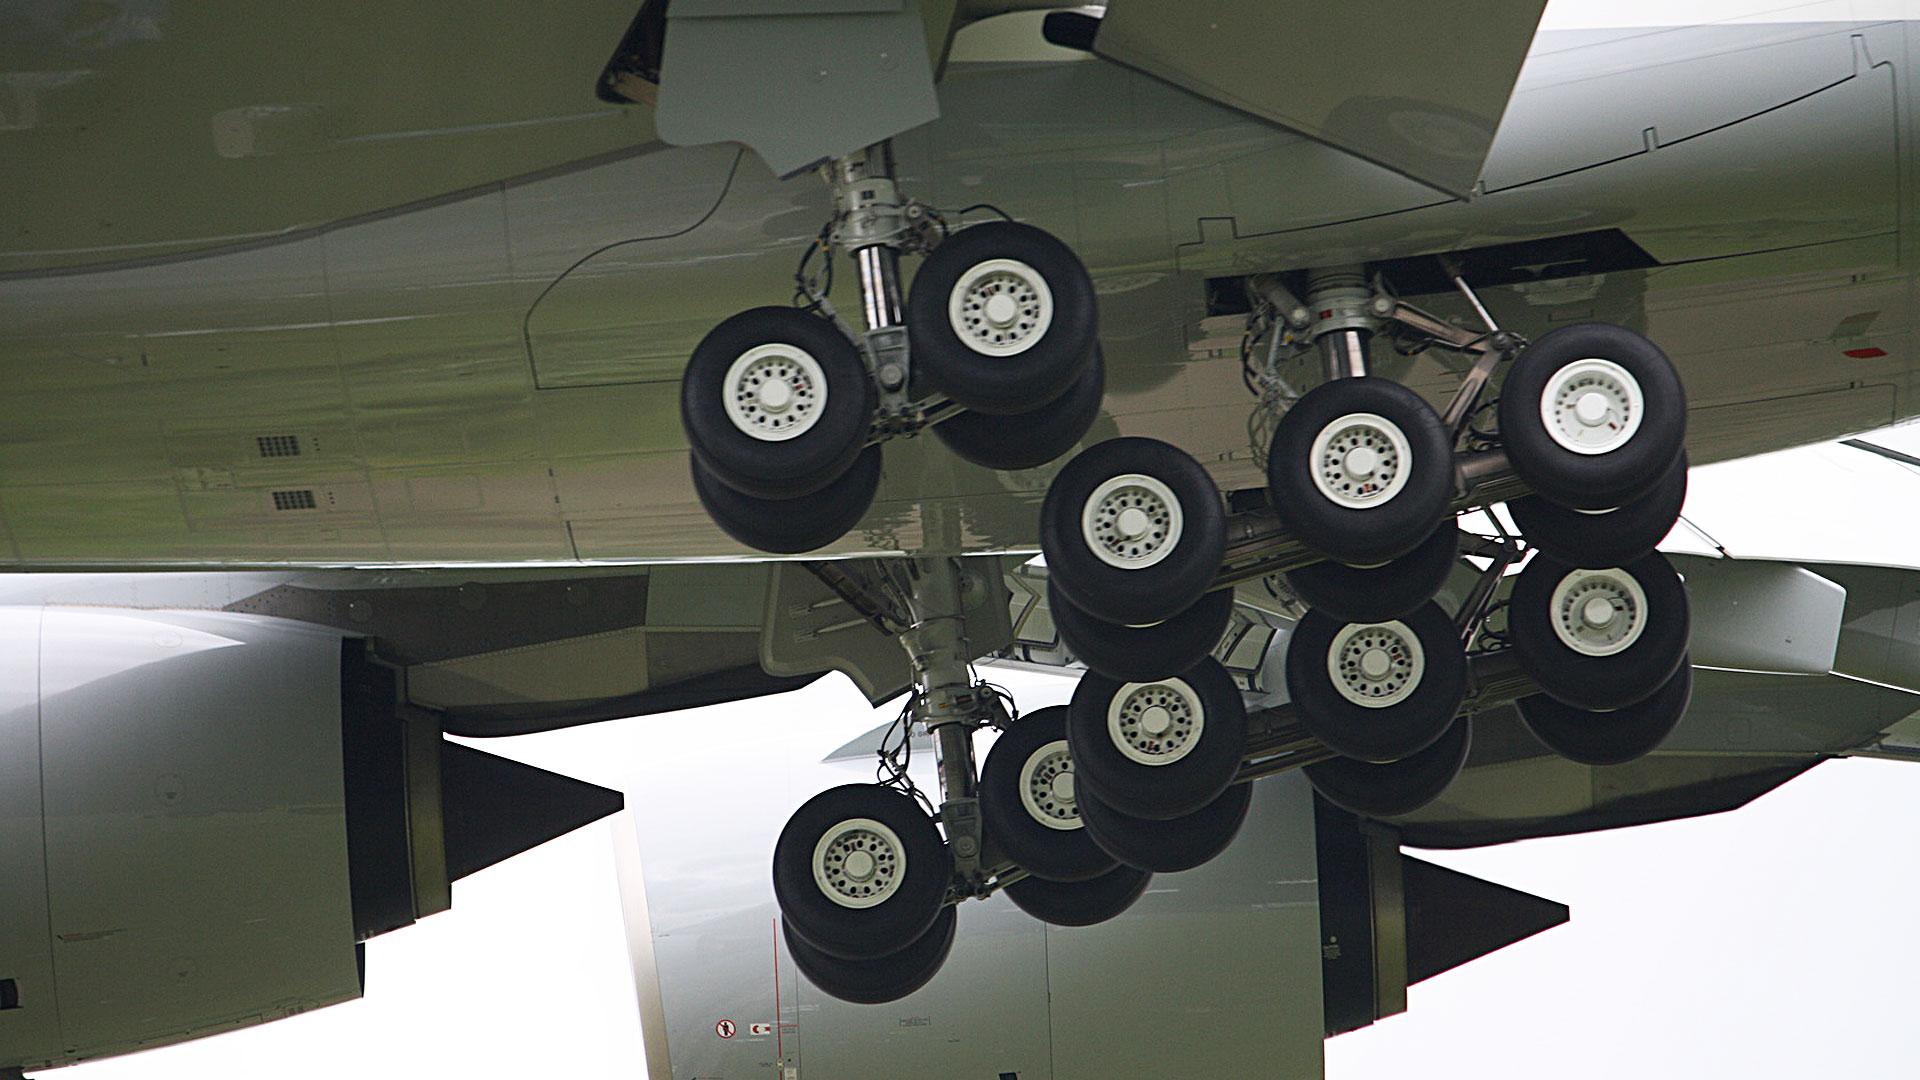 The tires of aircraft landing gear leave rubber on the runways.